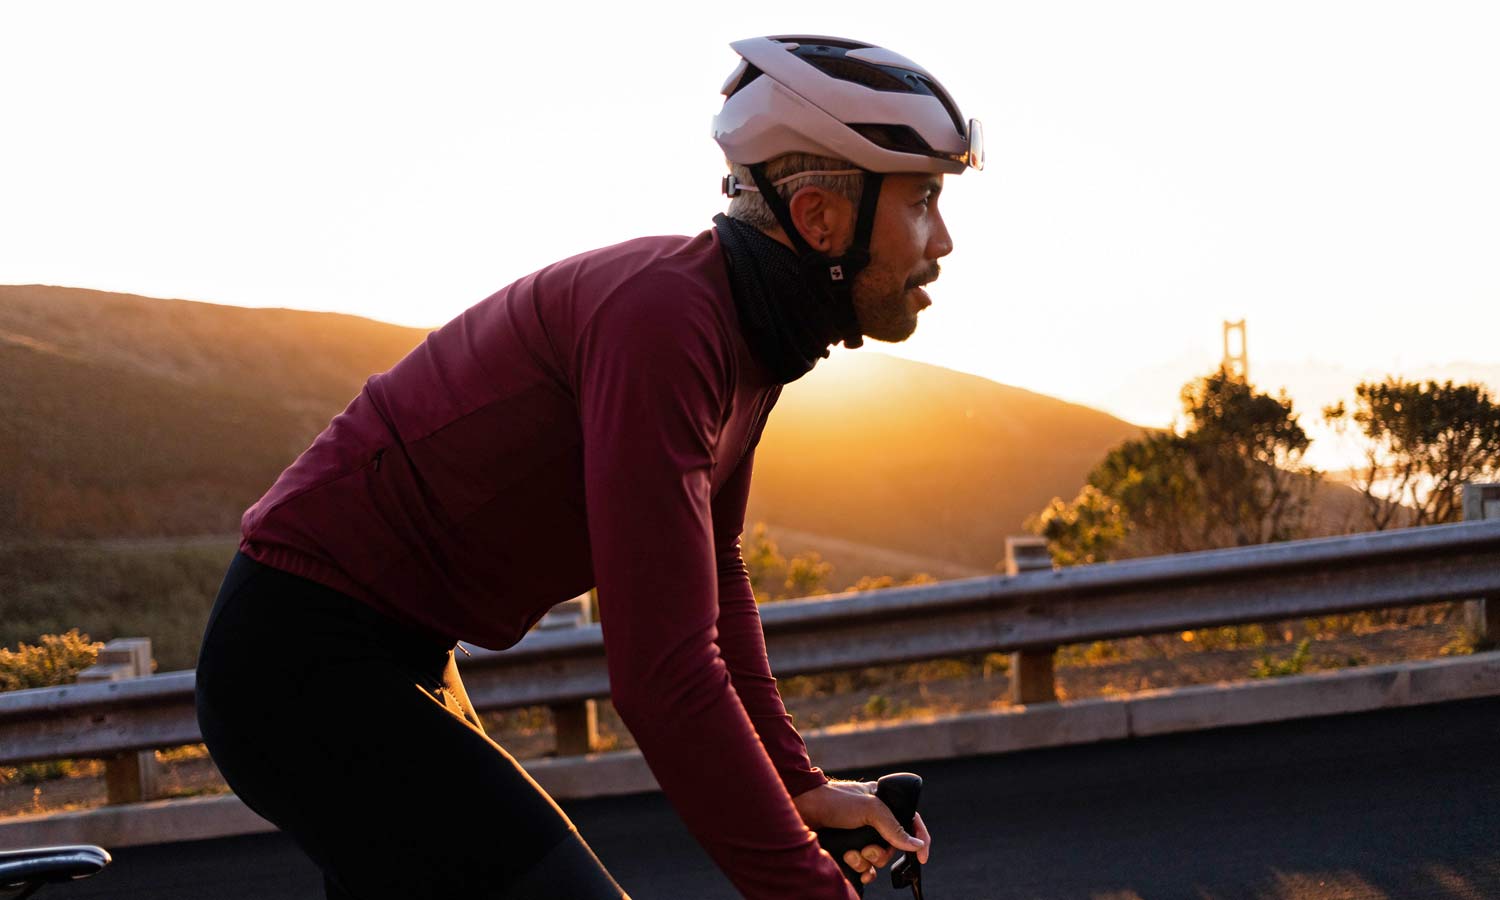 Ornot Magic Shell jacket gets even better in color, adds Power Wool jersey underneath